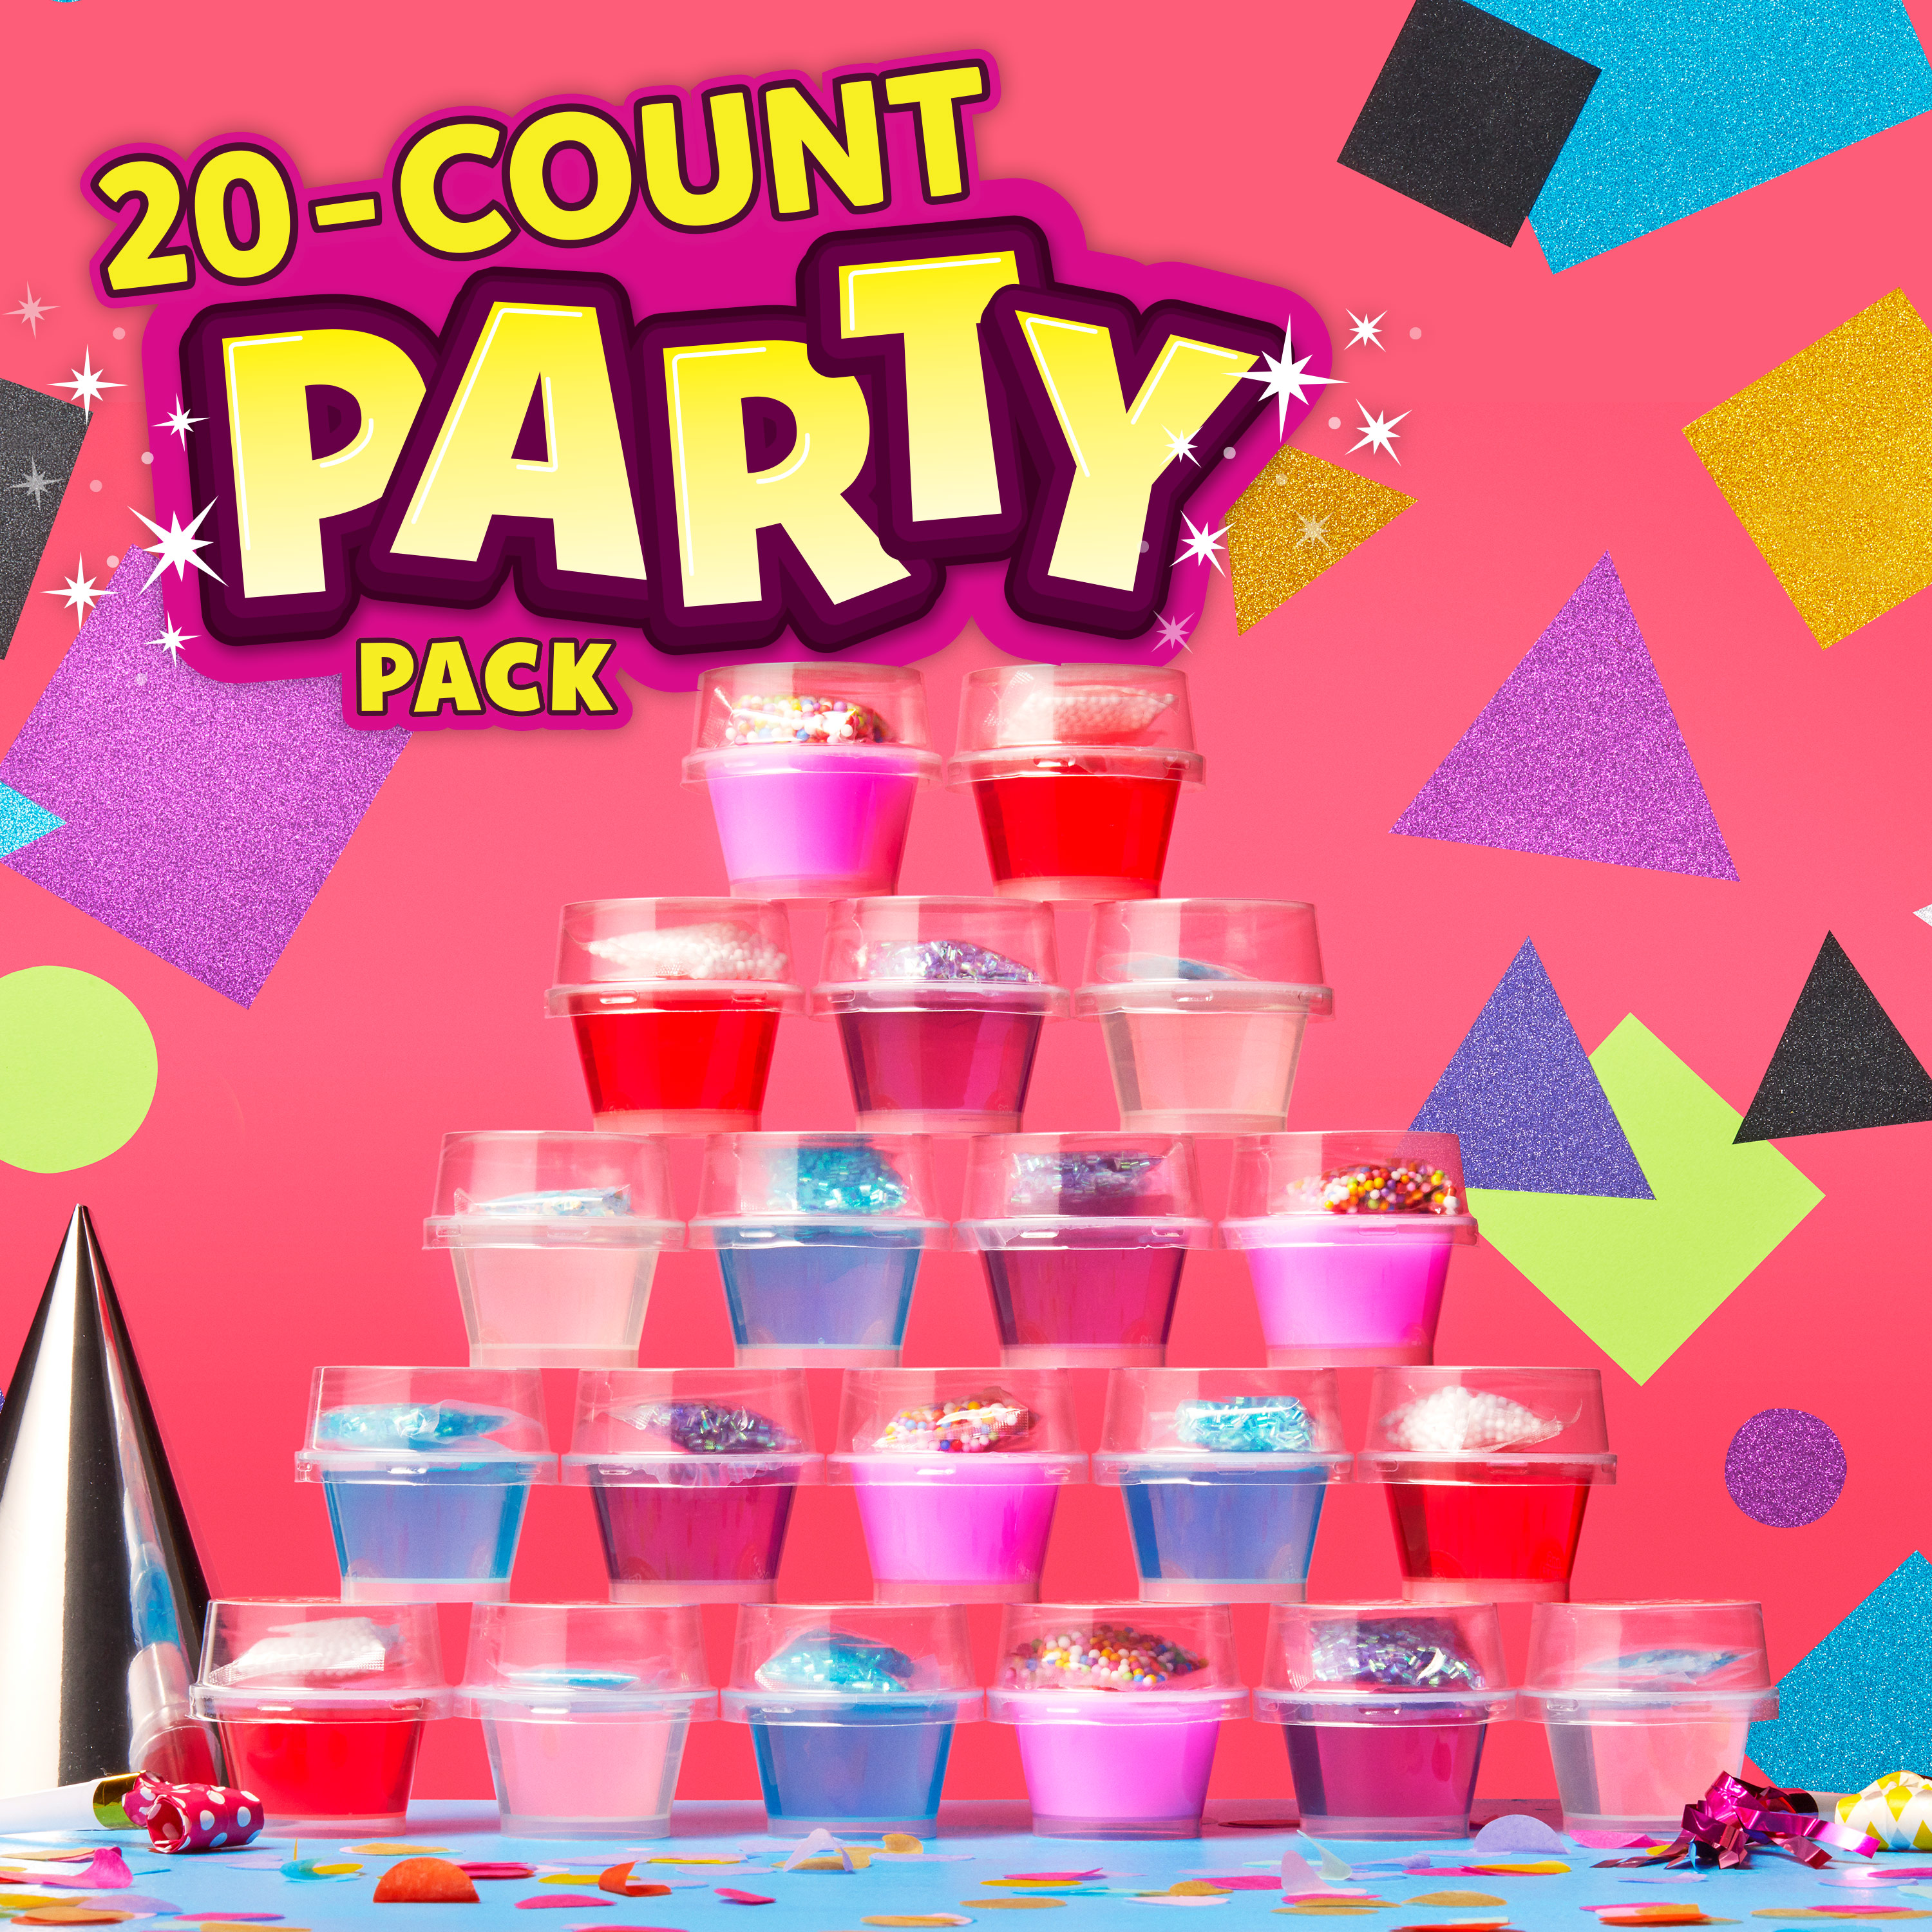 Elmer’s Gue Premade Slime, Slime Kit, Includes Fun, Unique Add-Ins, Party Pack, 20 Count - image 2 of 10